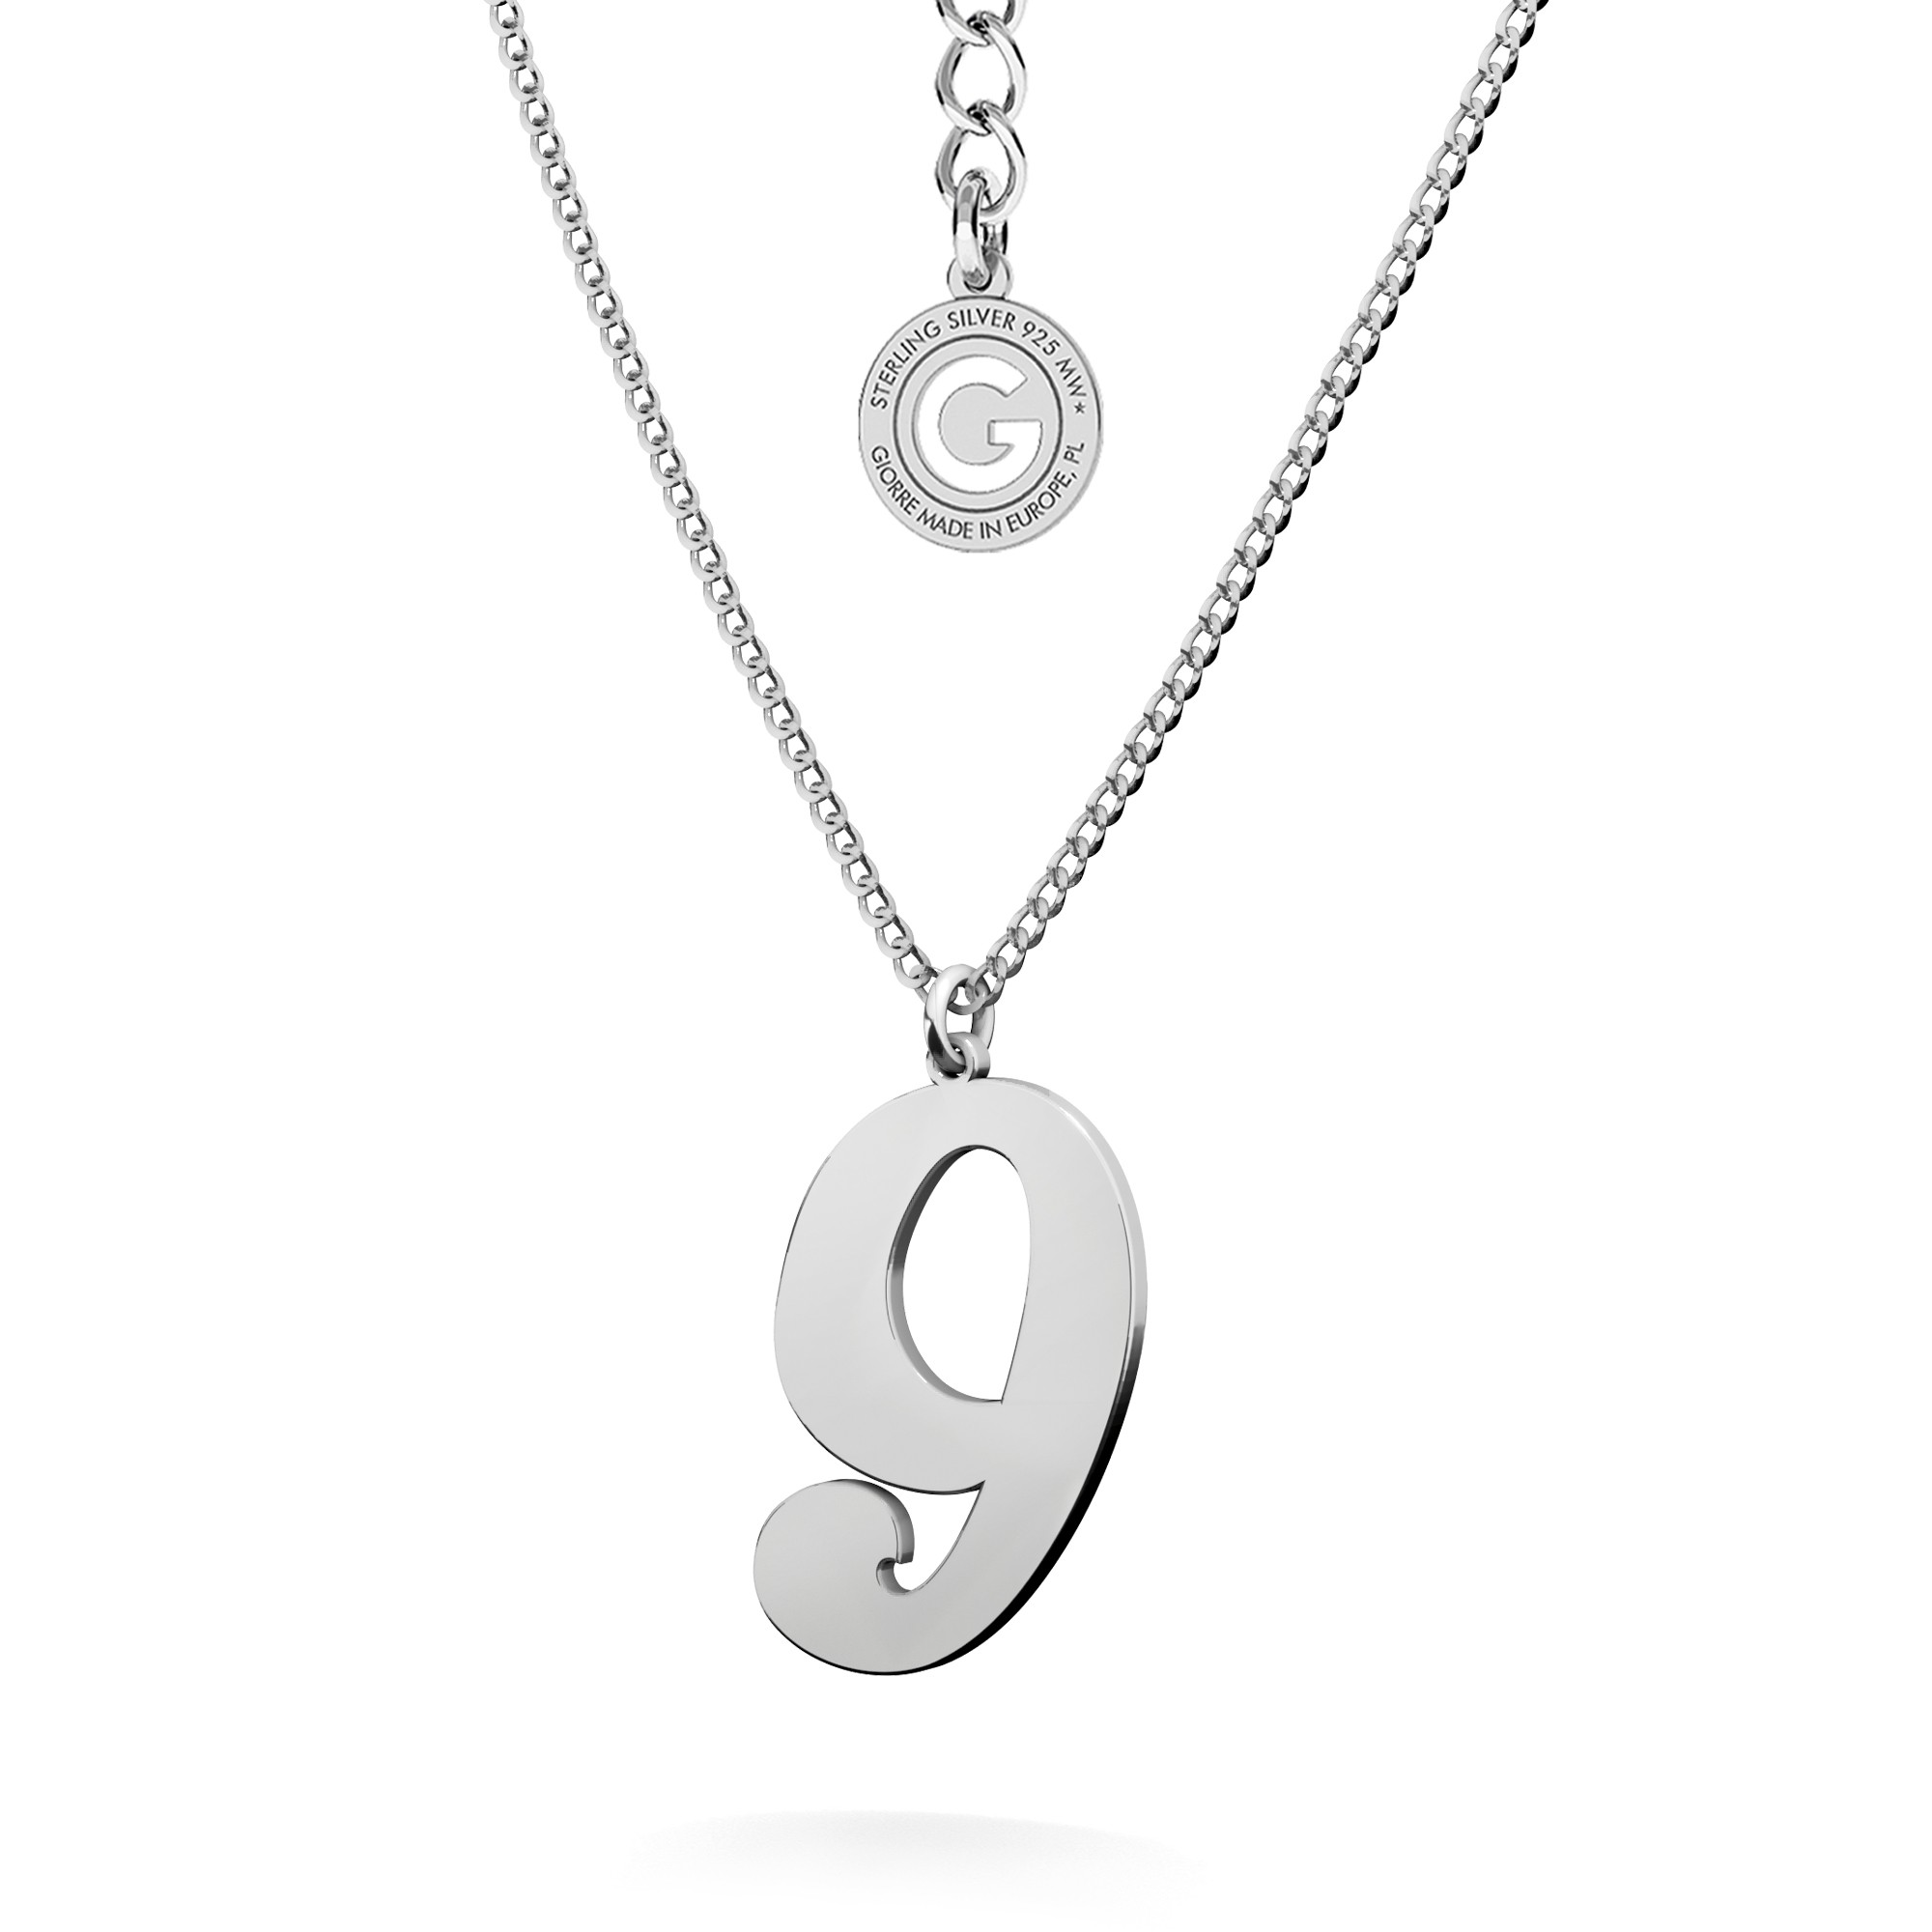 Giorre Woman's Necklace 35793